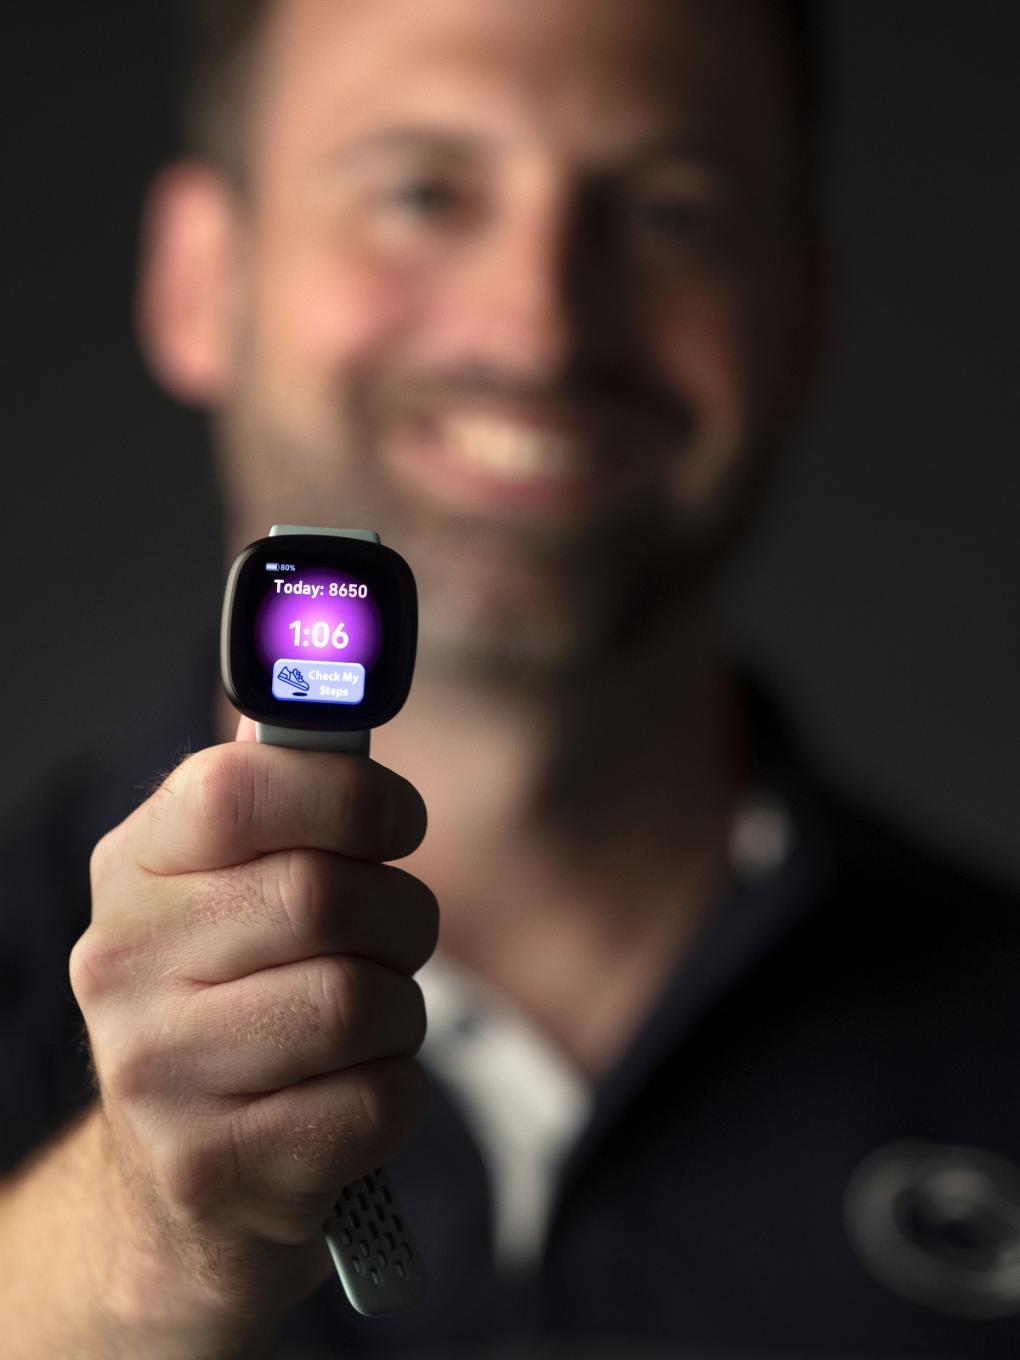 Researcher with FitBit watch